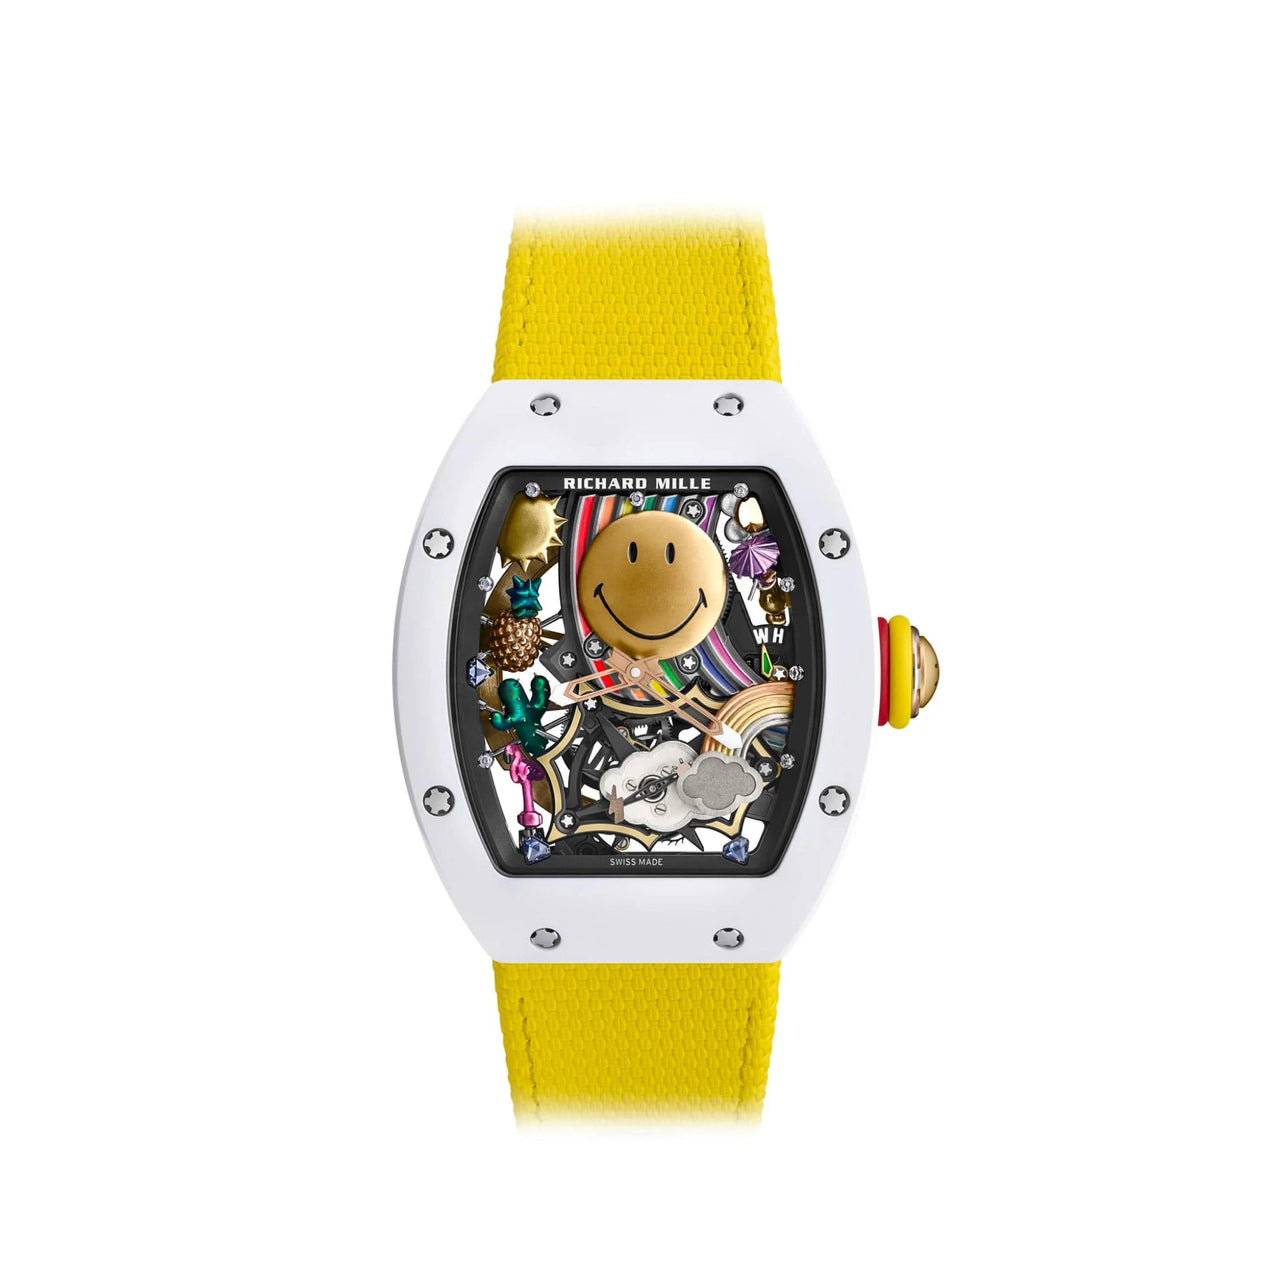 Richard Mille RM 88 Automatic Winding Tourbillon 'Smiley Face' Limited Edition